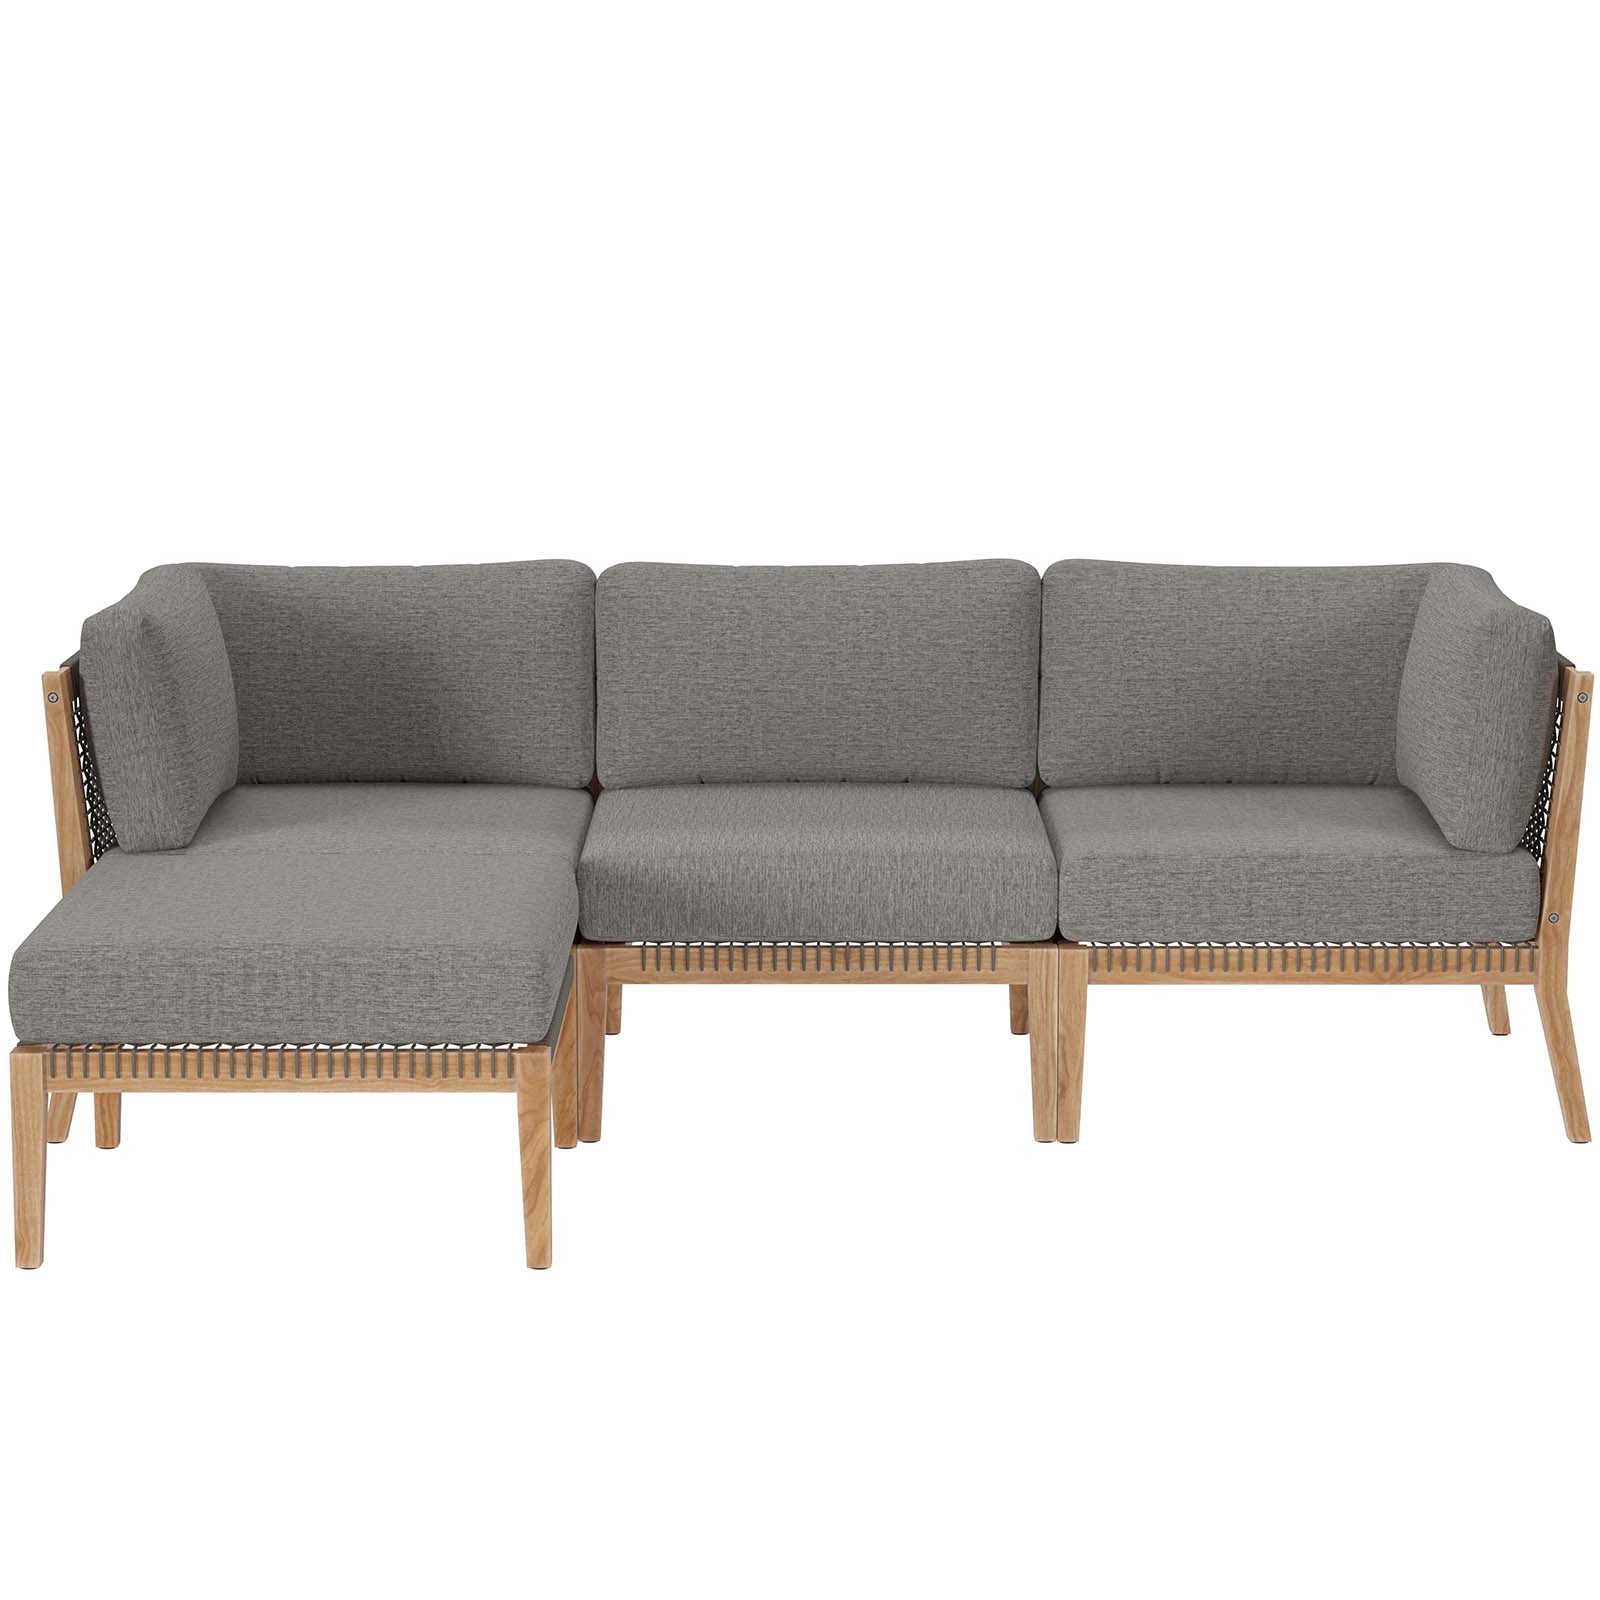 Modway Outdoor Sofas - Clearwater-Outdoor-Patio-Teak-Wood-4-Piece-Sectional-Sofa-Gray-Graphite